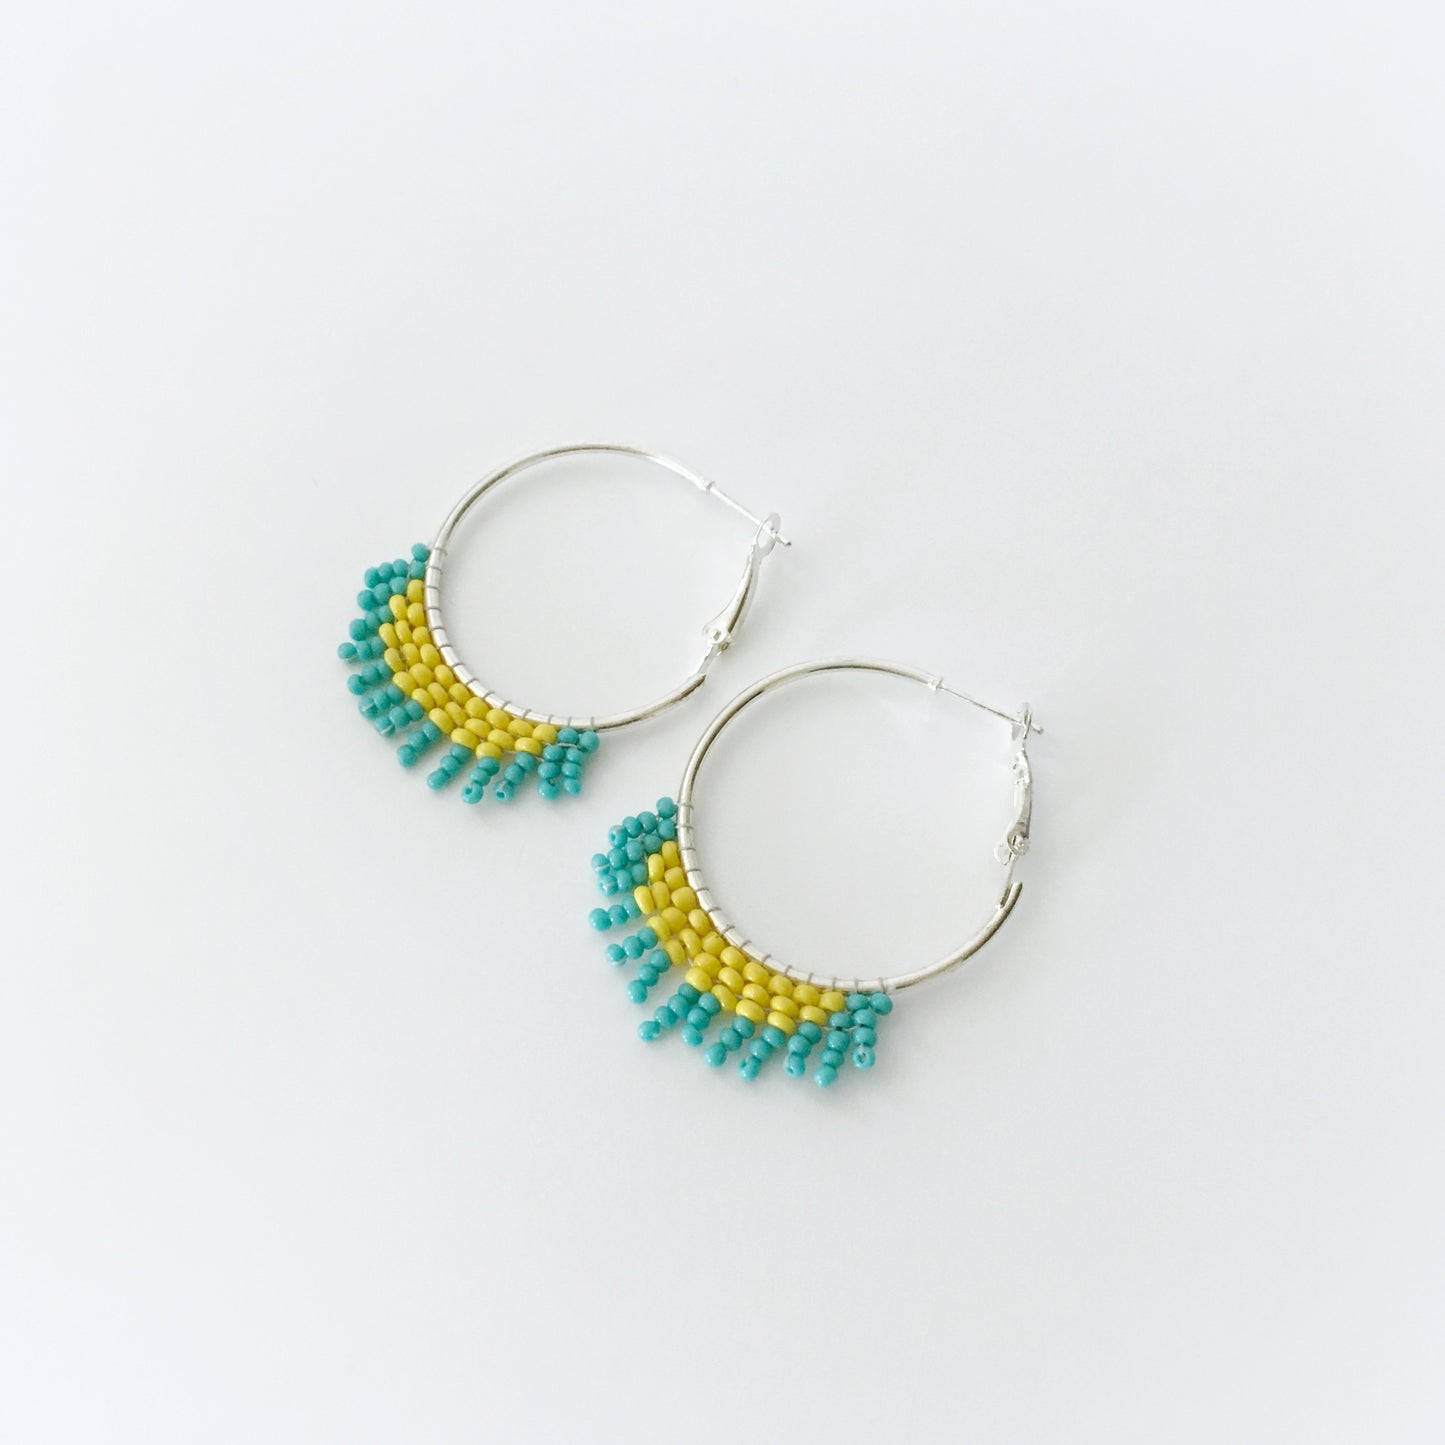 Oasis Bahama Blue and Gold Earrings